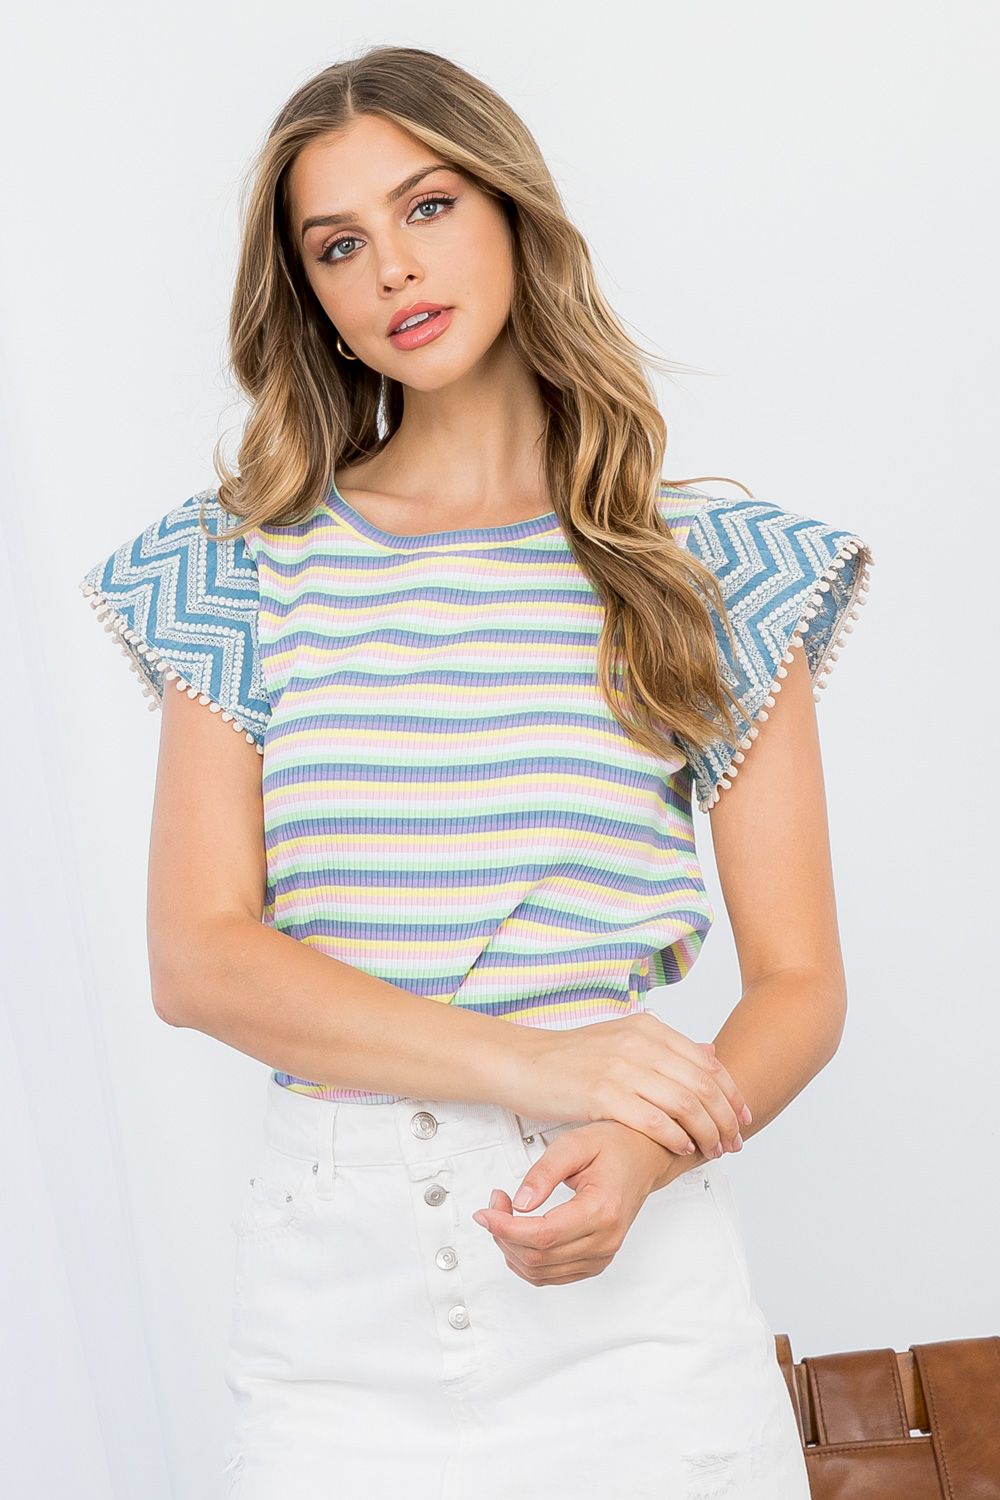 Seize the Day Striped Top-THML